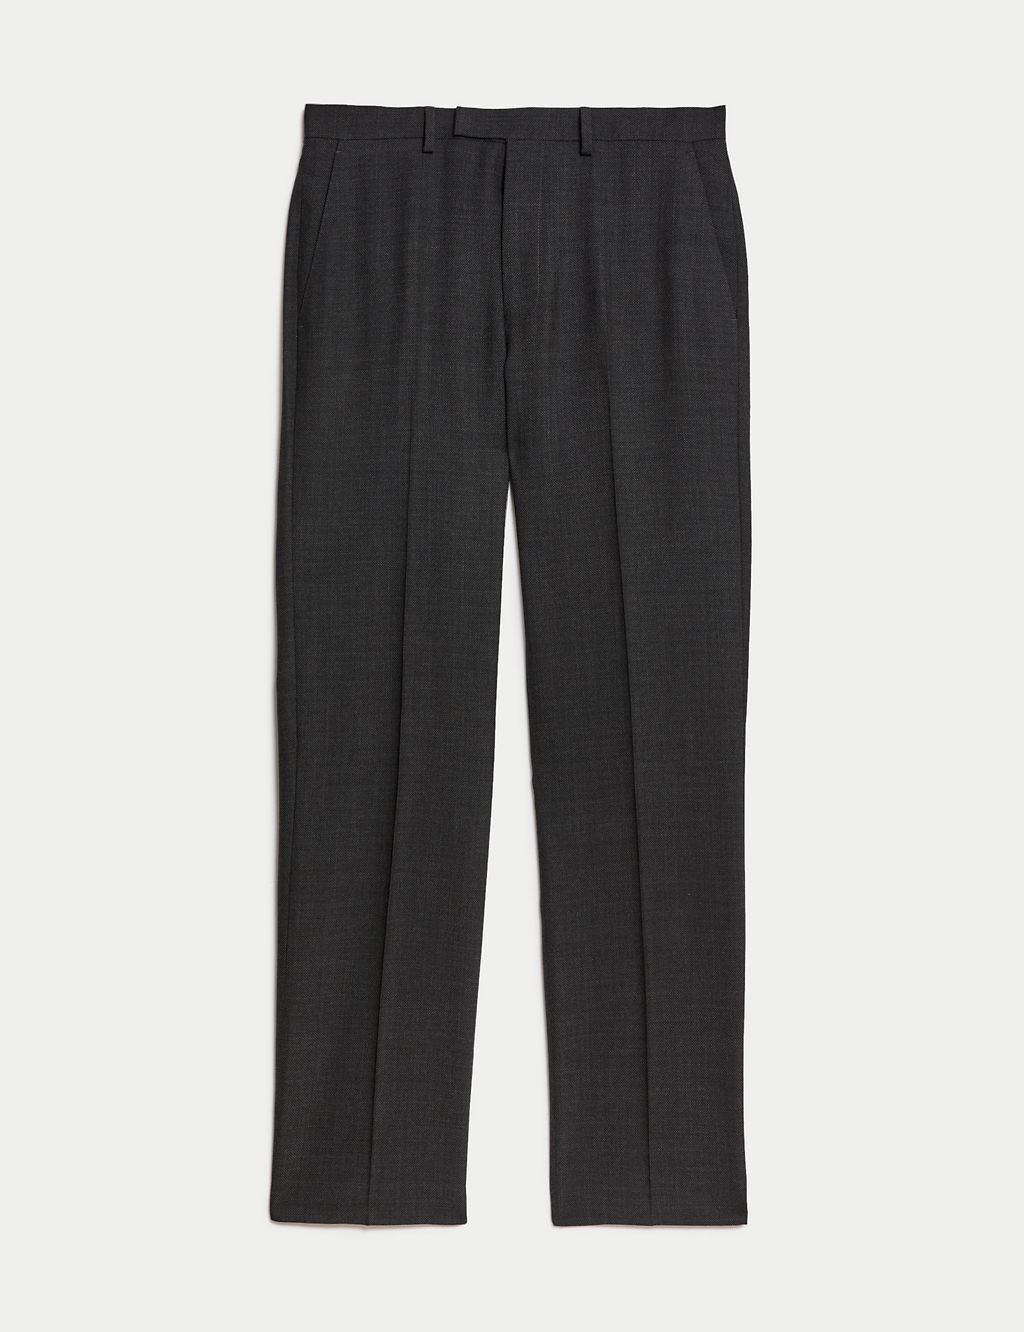 Regular Fit Pure Wool Textured Suit Trousers | M&S SARTORIAL | M&S